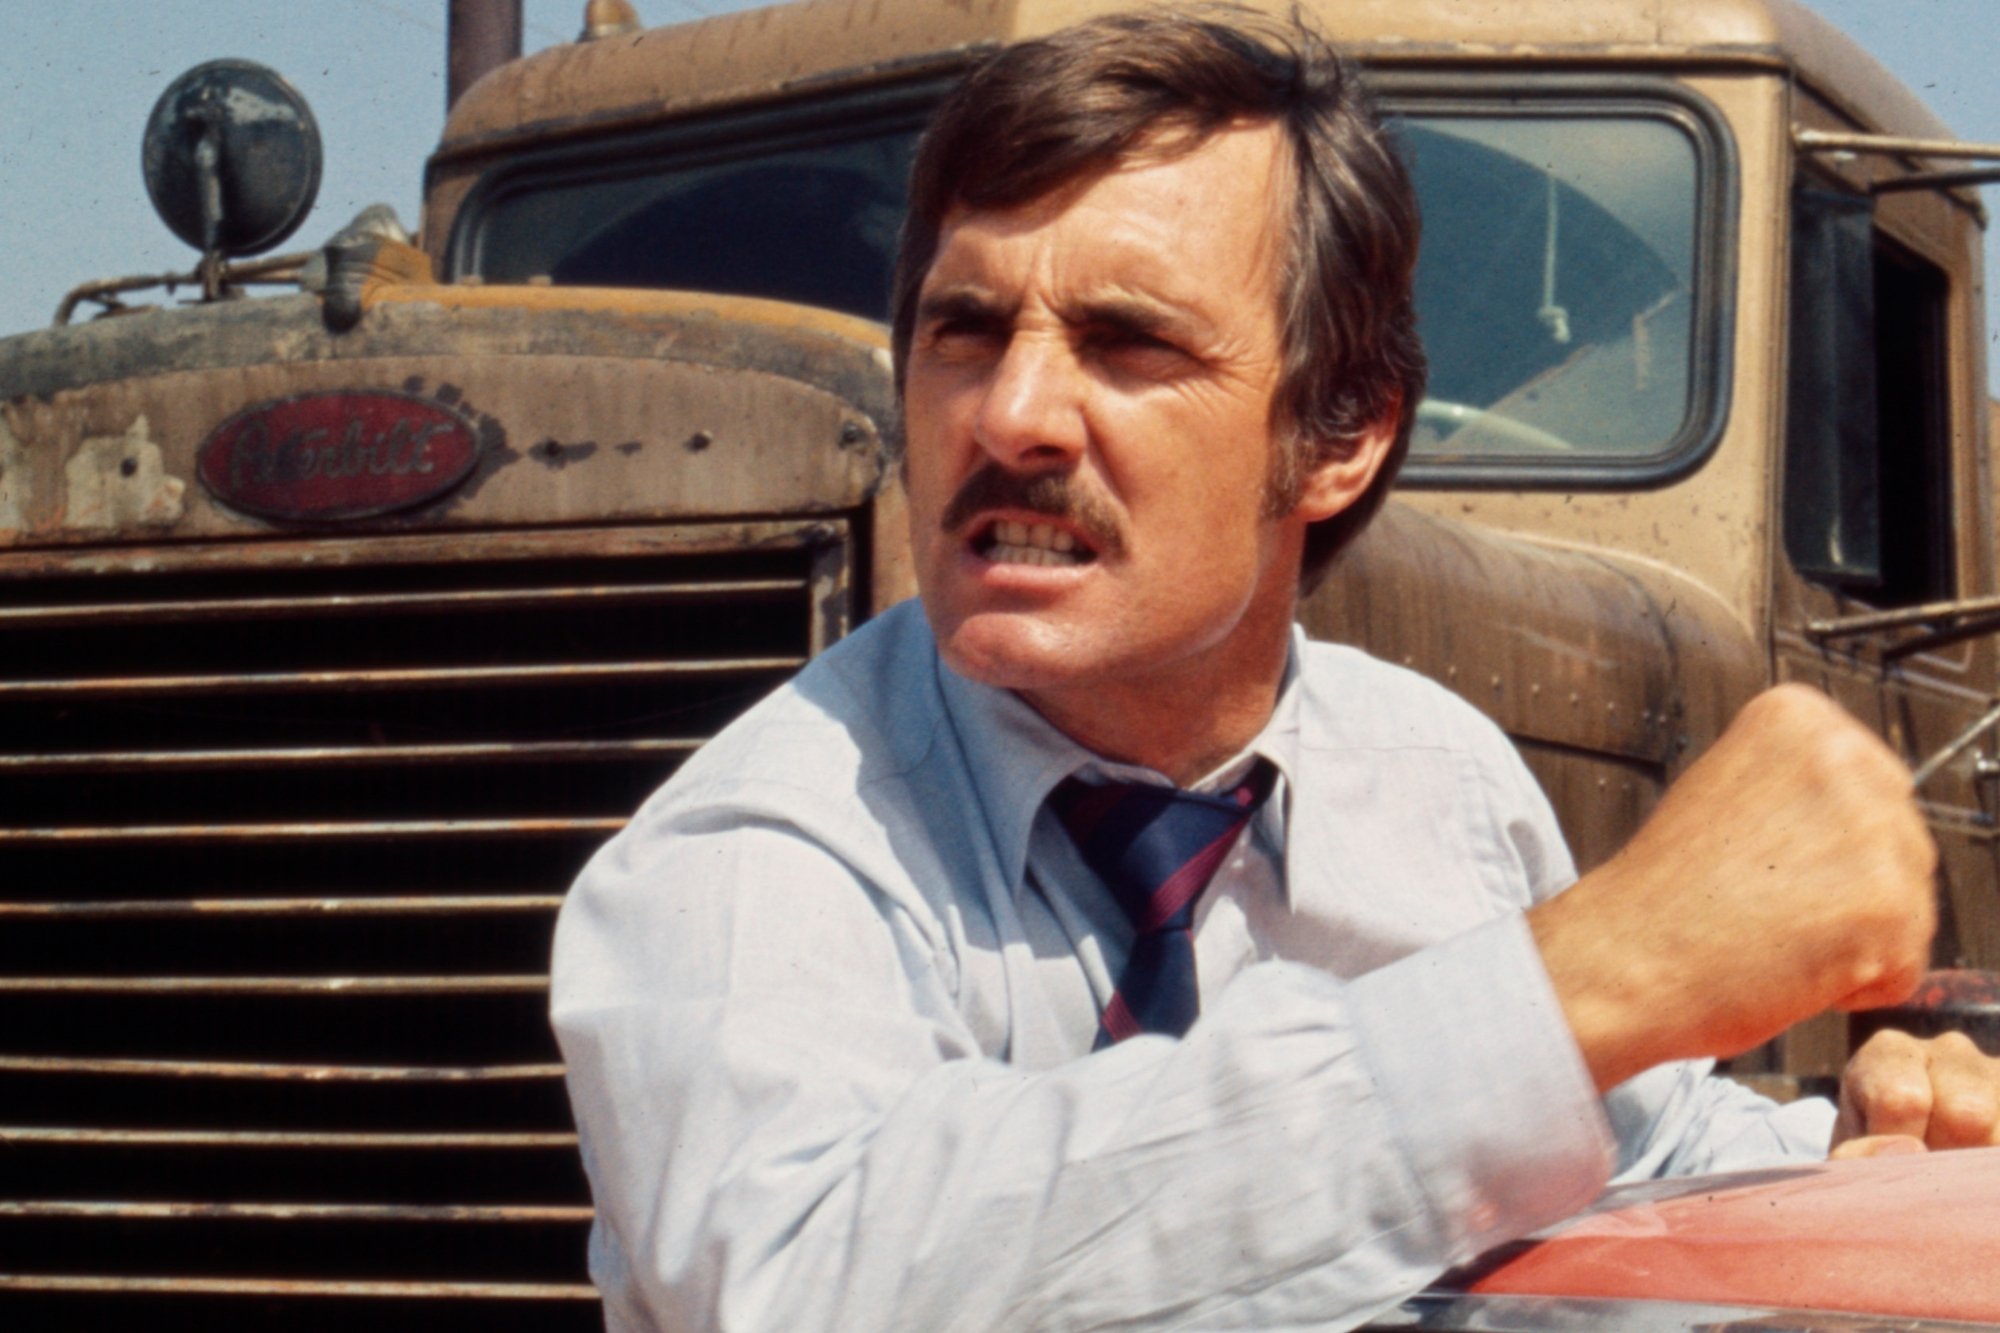 'Gunsmoke' actor Dennis Weaver in Steven Spielberg's 'Duel' clenching his fist in front of a semi-truck.